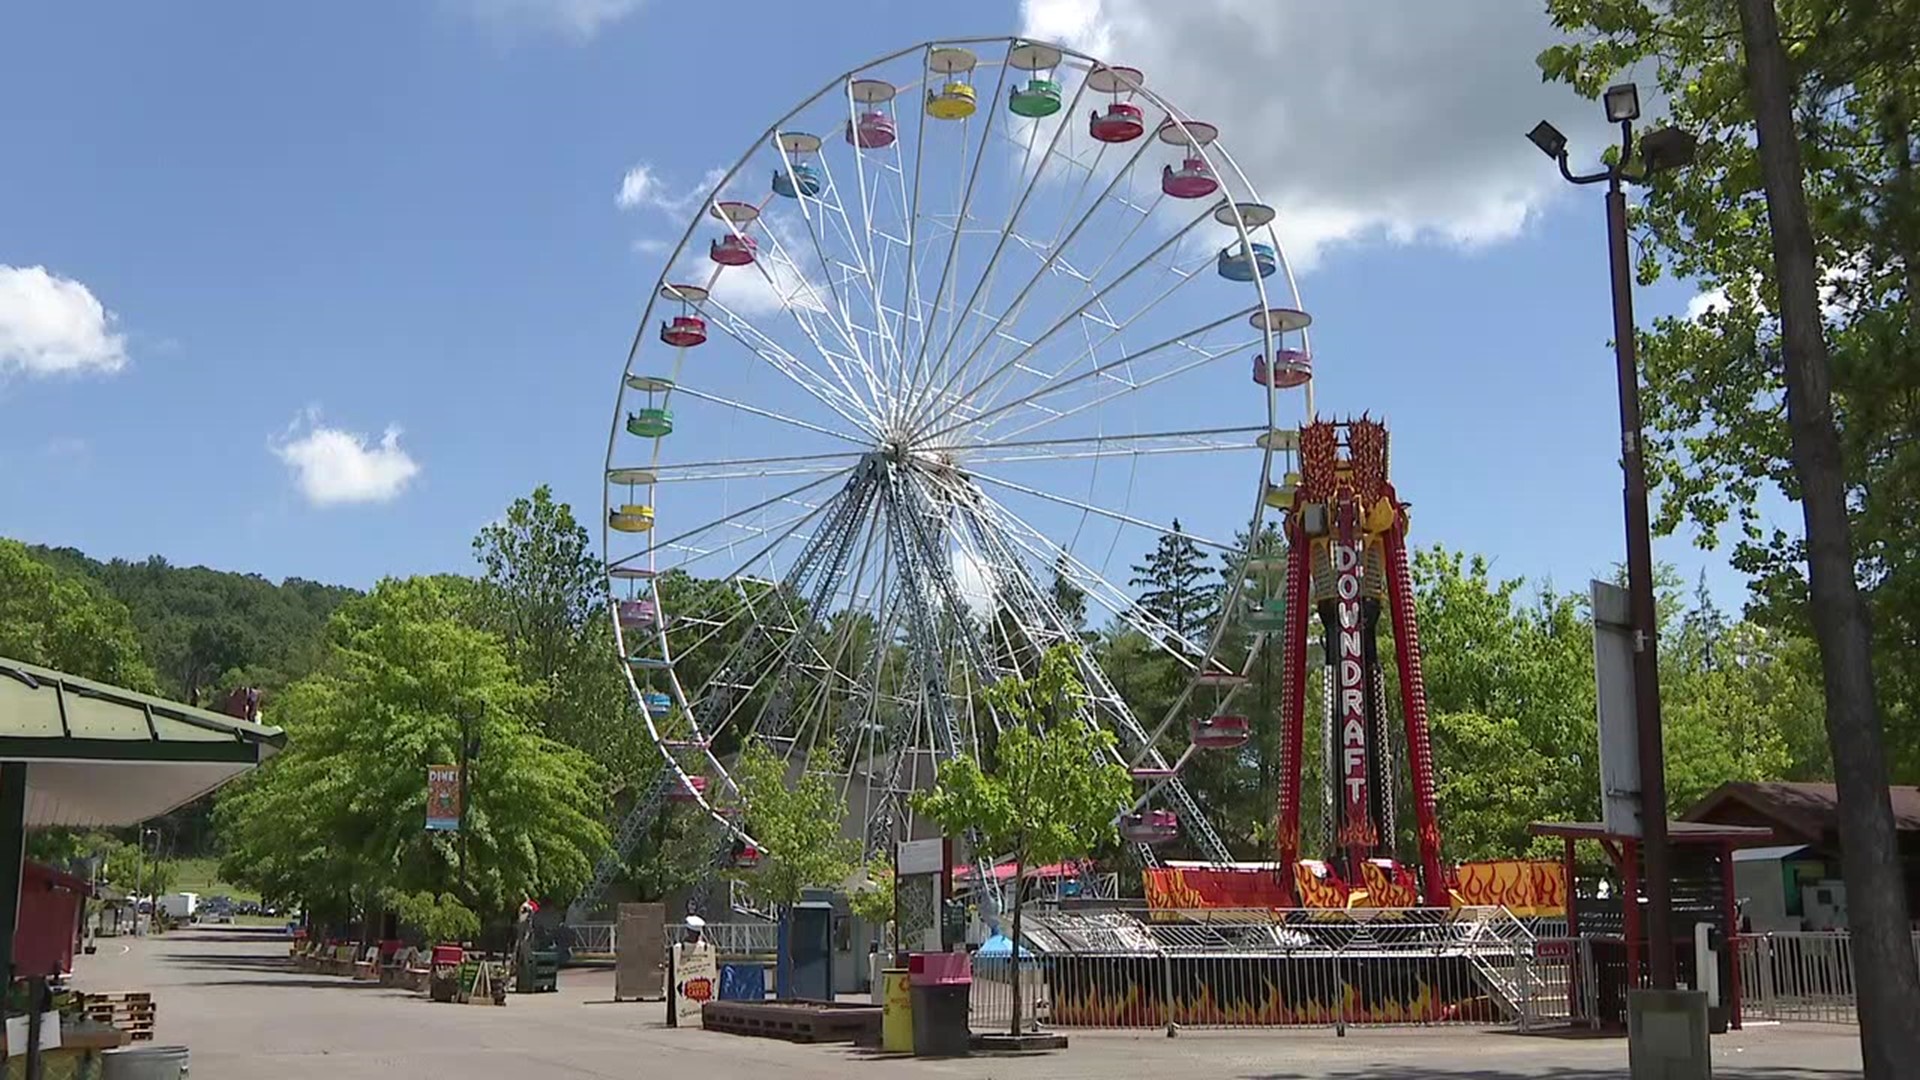 It's the day many people in our area have been patiently waiting for: the opening of Knoebels Amusement Resort.